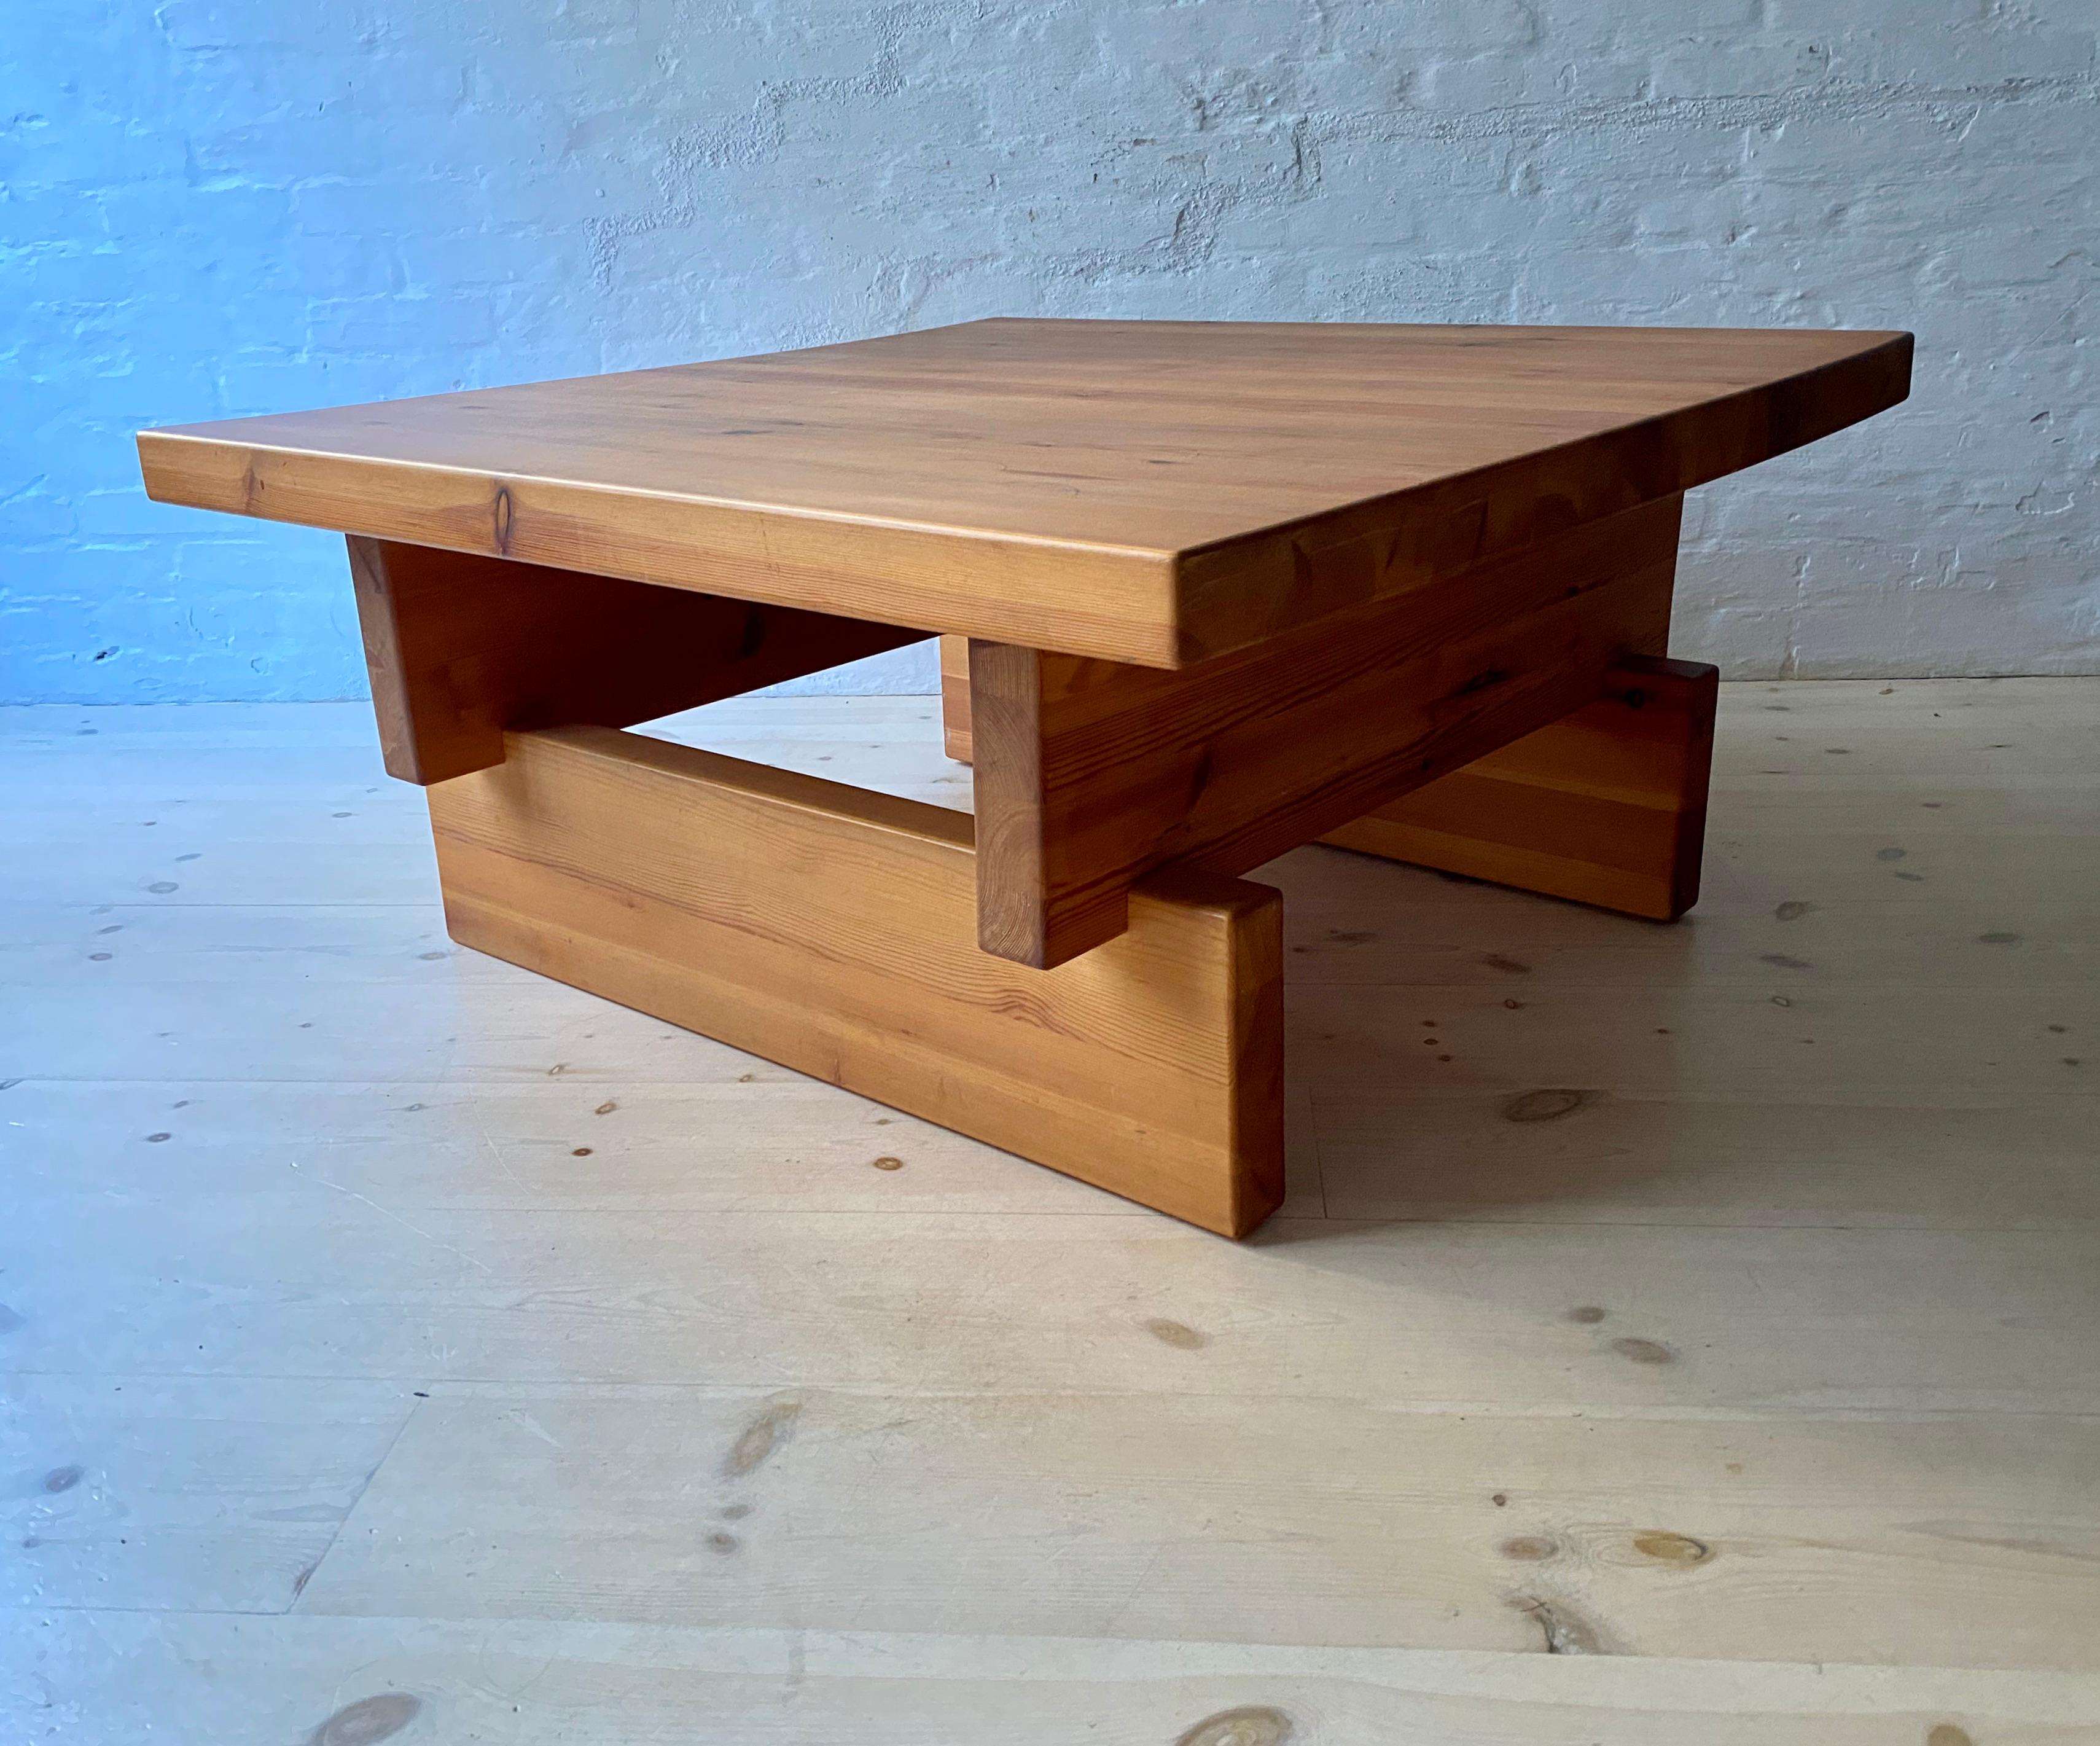 A large coffee table in Swedish pine designed by Roland Wilhelmsson and produced by Karl Andersson and Soner AB, Sweden. With a square top set on opposed supports. The thickness of the top and supports is 5.5cm. (2 1/4in.) The character of this type